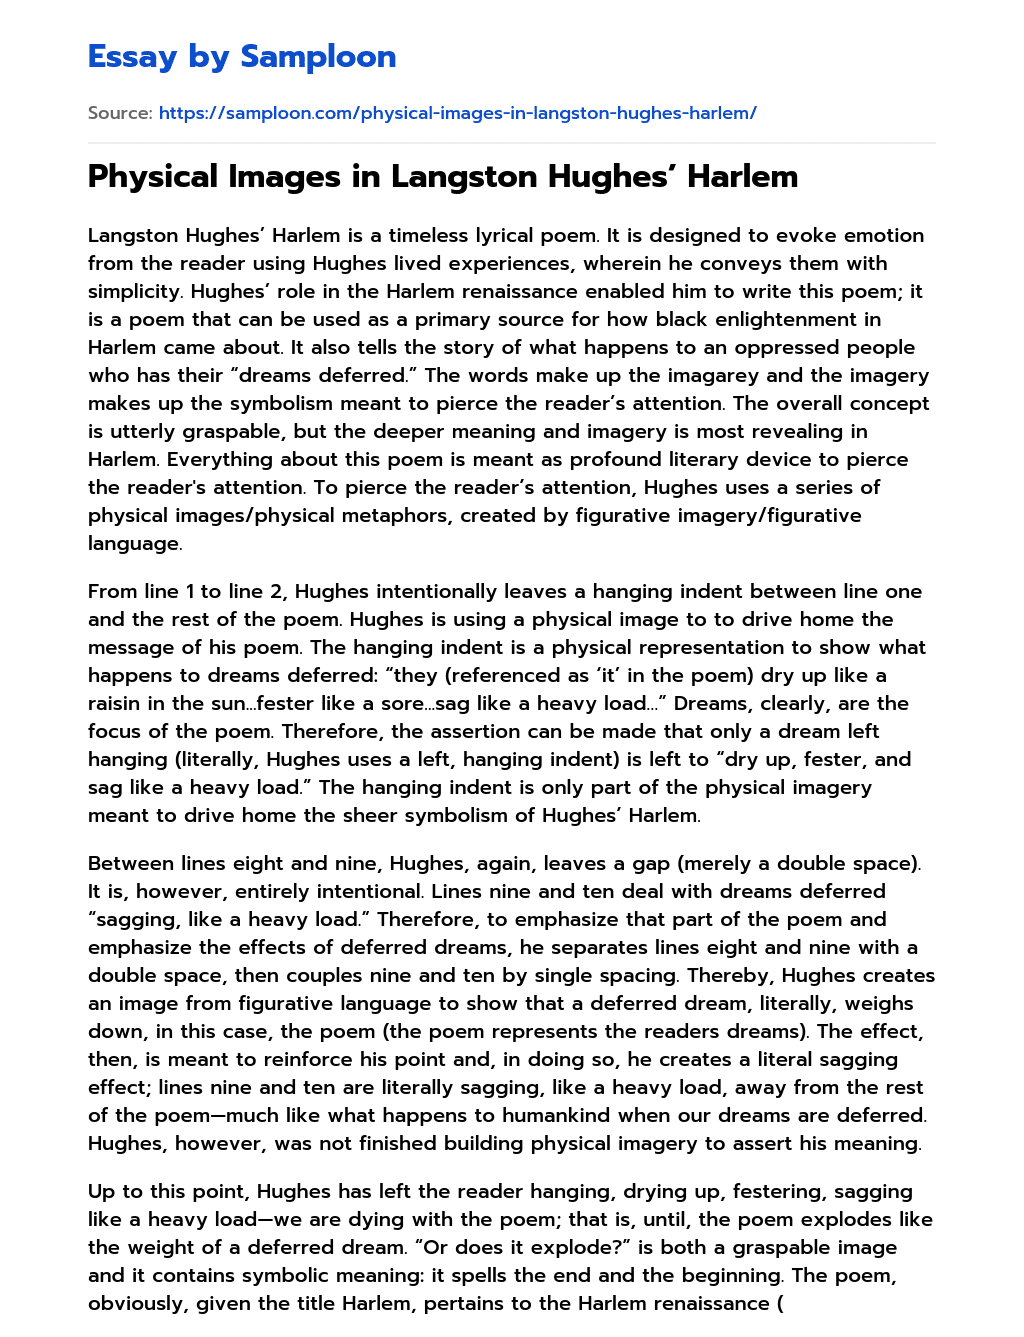 Physical Images in Langston Hughes’ Harlem Summary essay